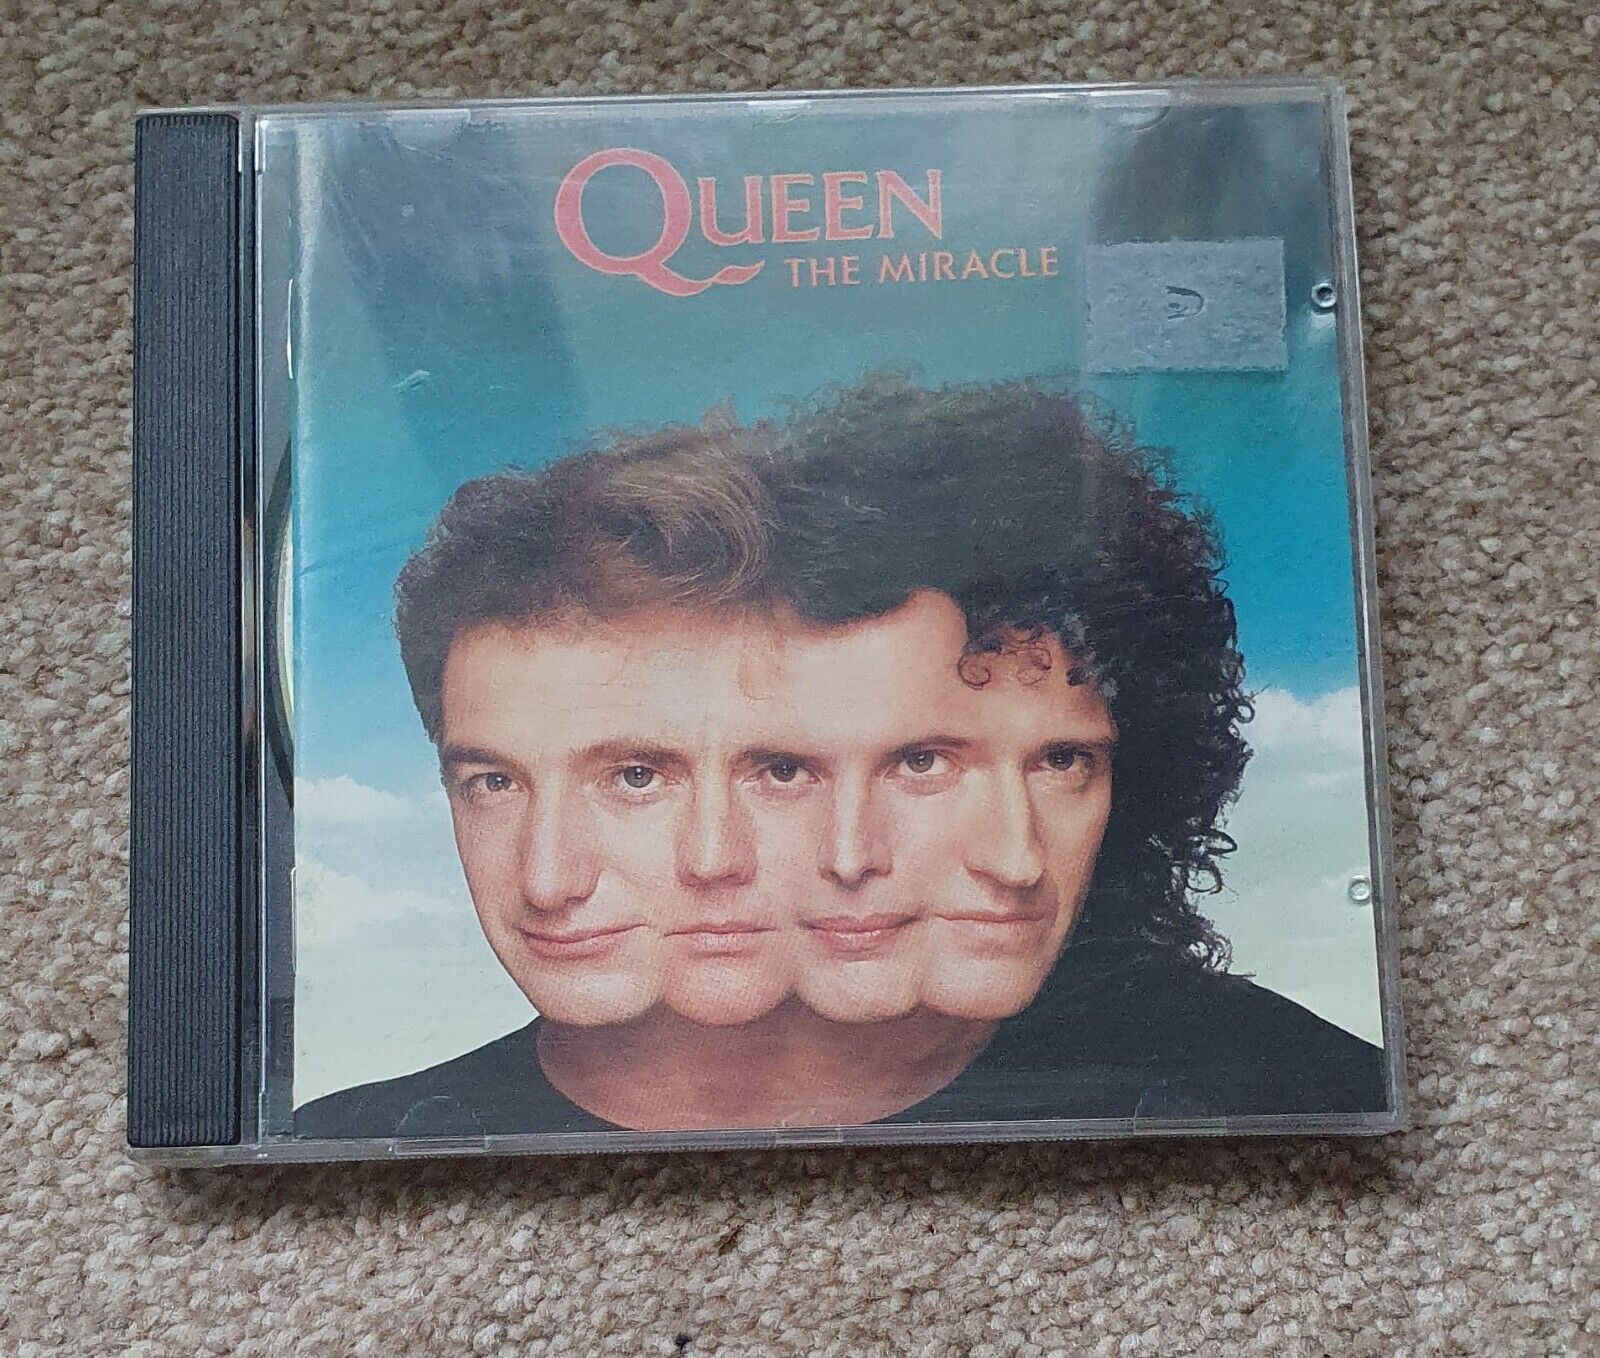 Queen - The Miracle CD